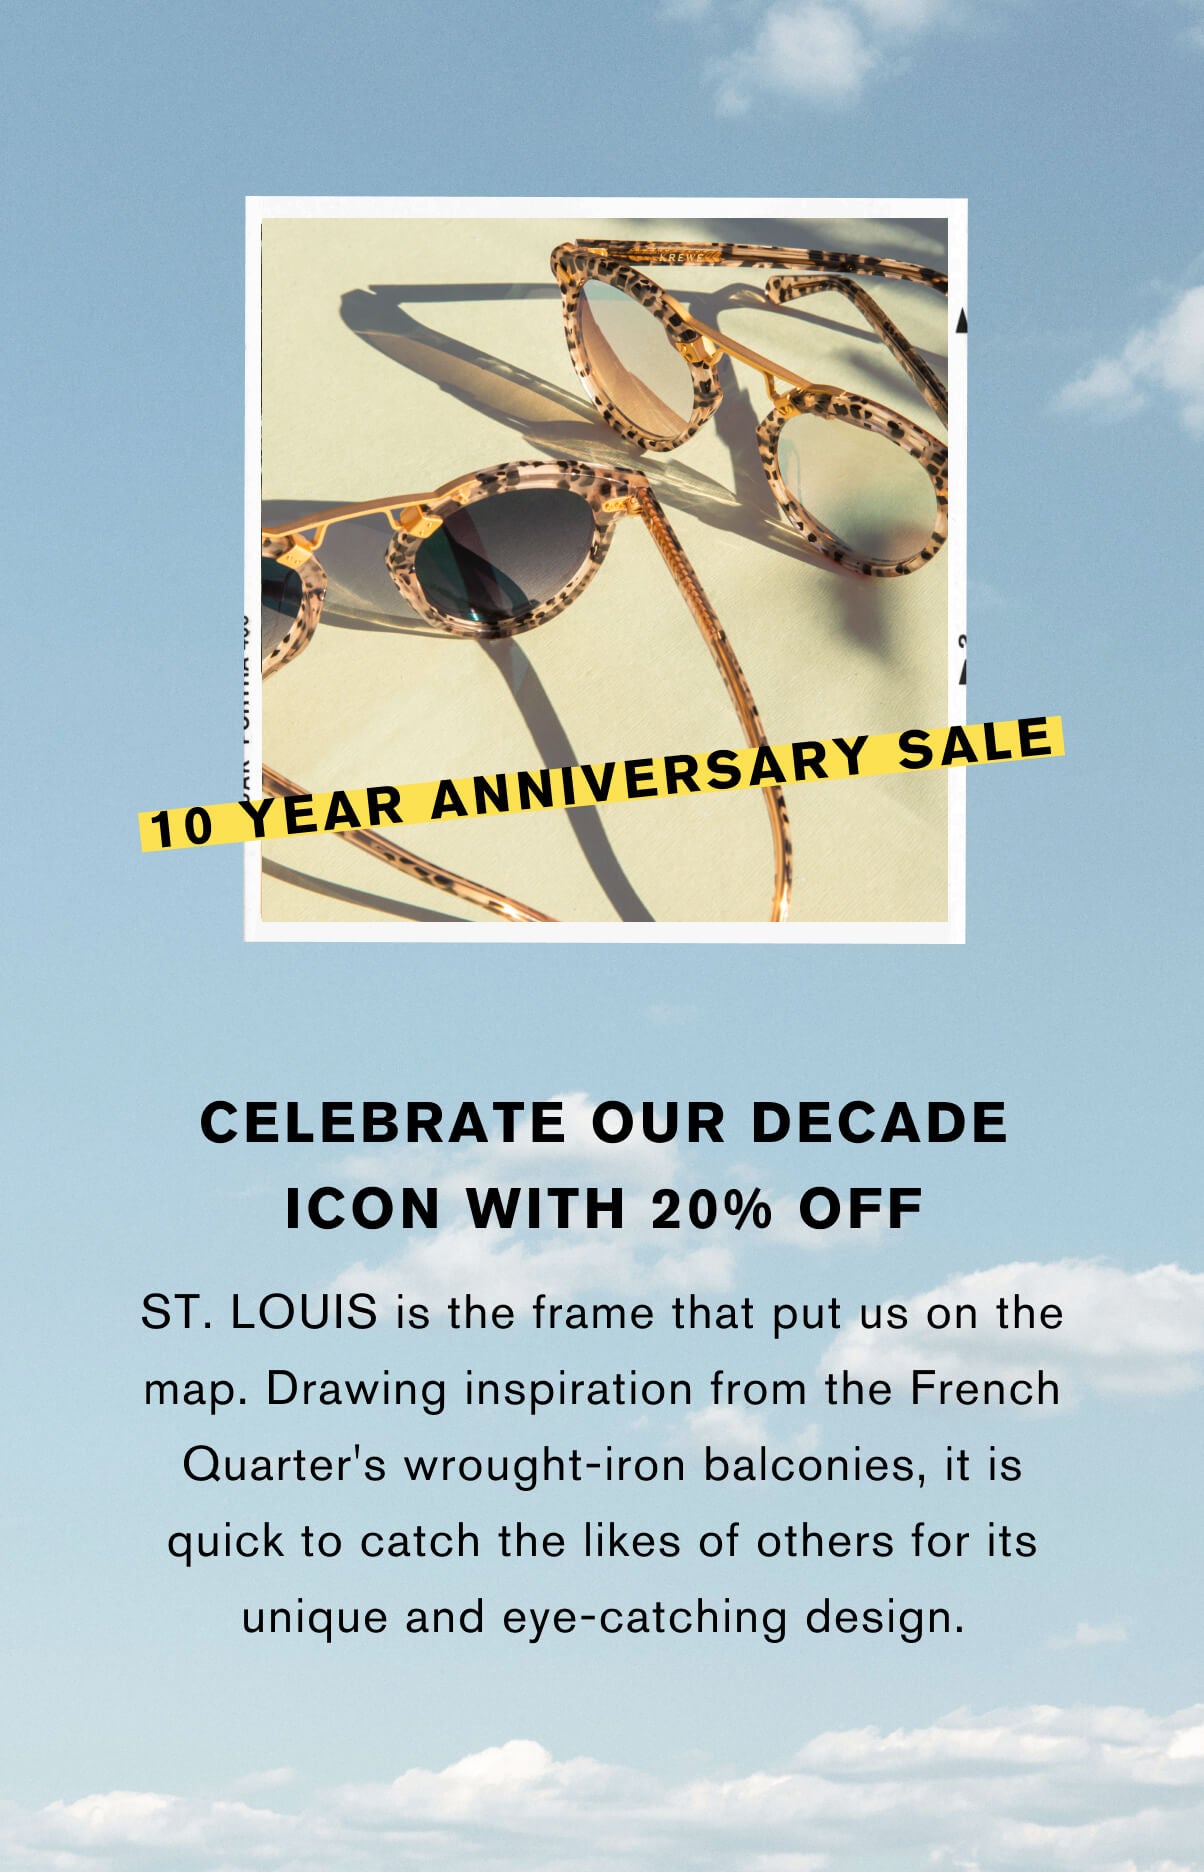 Celebrate our decade icon with 20th off St. Louis is the frame that put us on the map. Drawing inspiration from the French Quarter's wrought-iron balconies, it is quick to catch the likes of others for its unique and eye-catching design